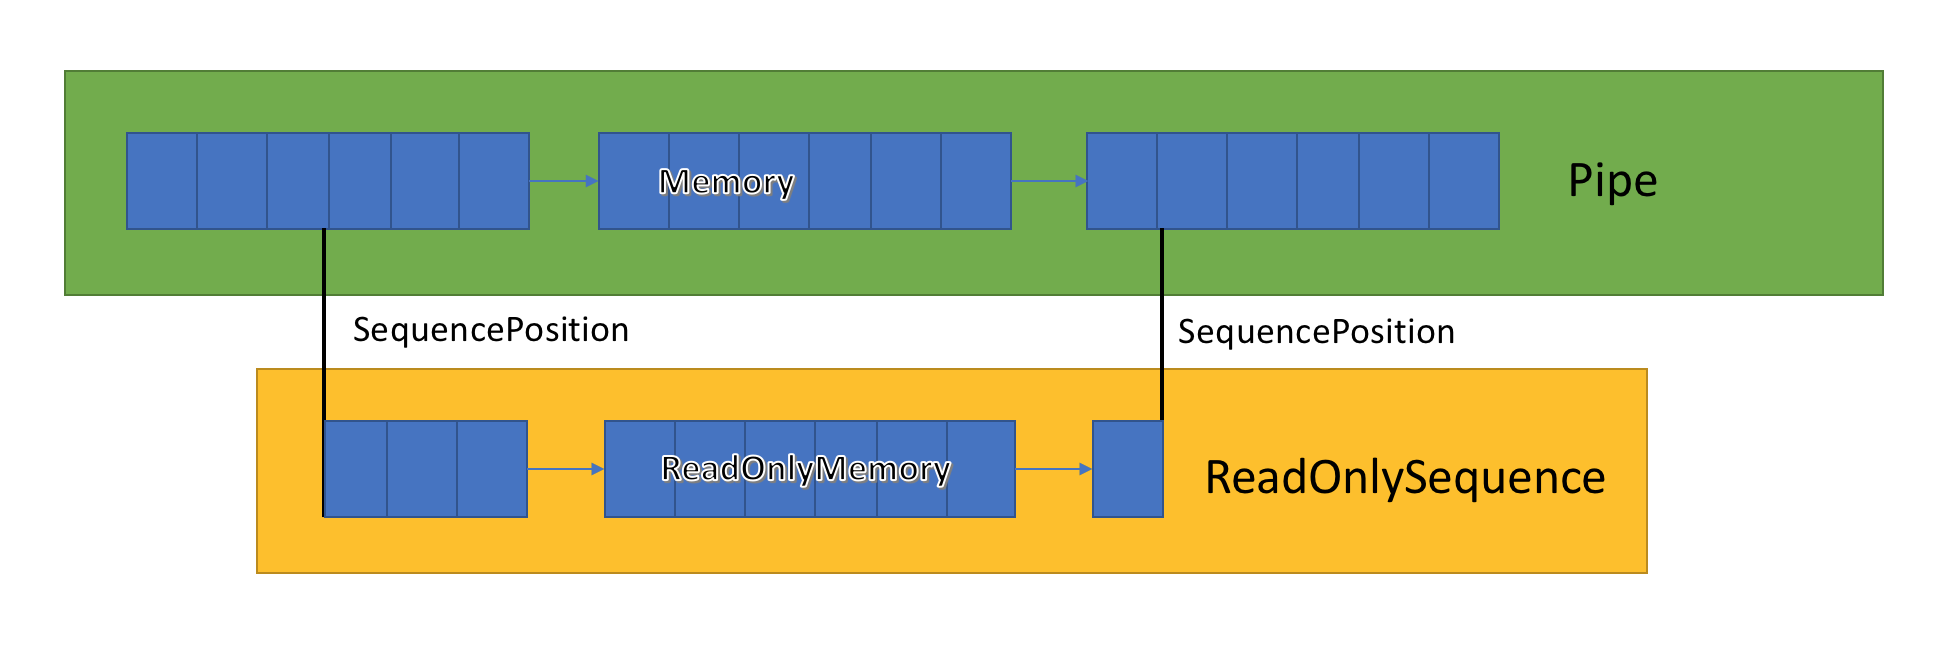 ReadOnlySequence showing memory in pipe and below that sequence position of read-only memory